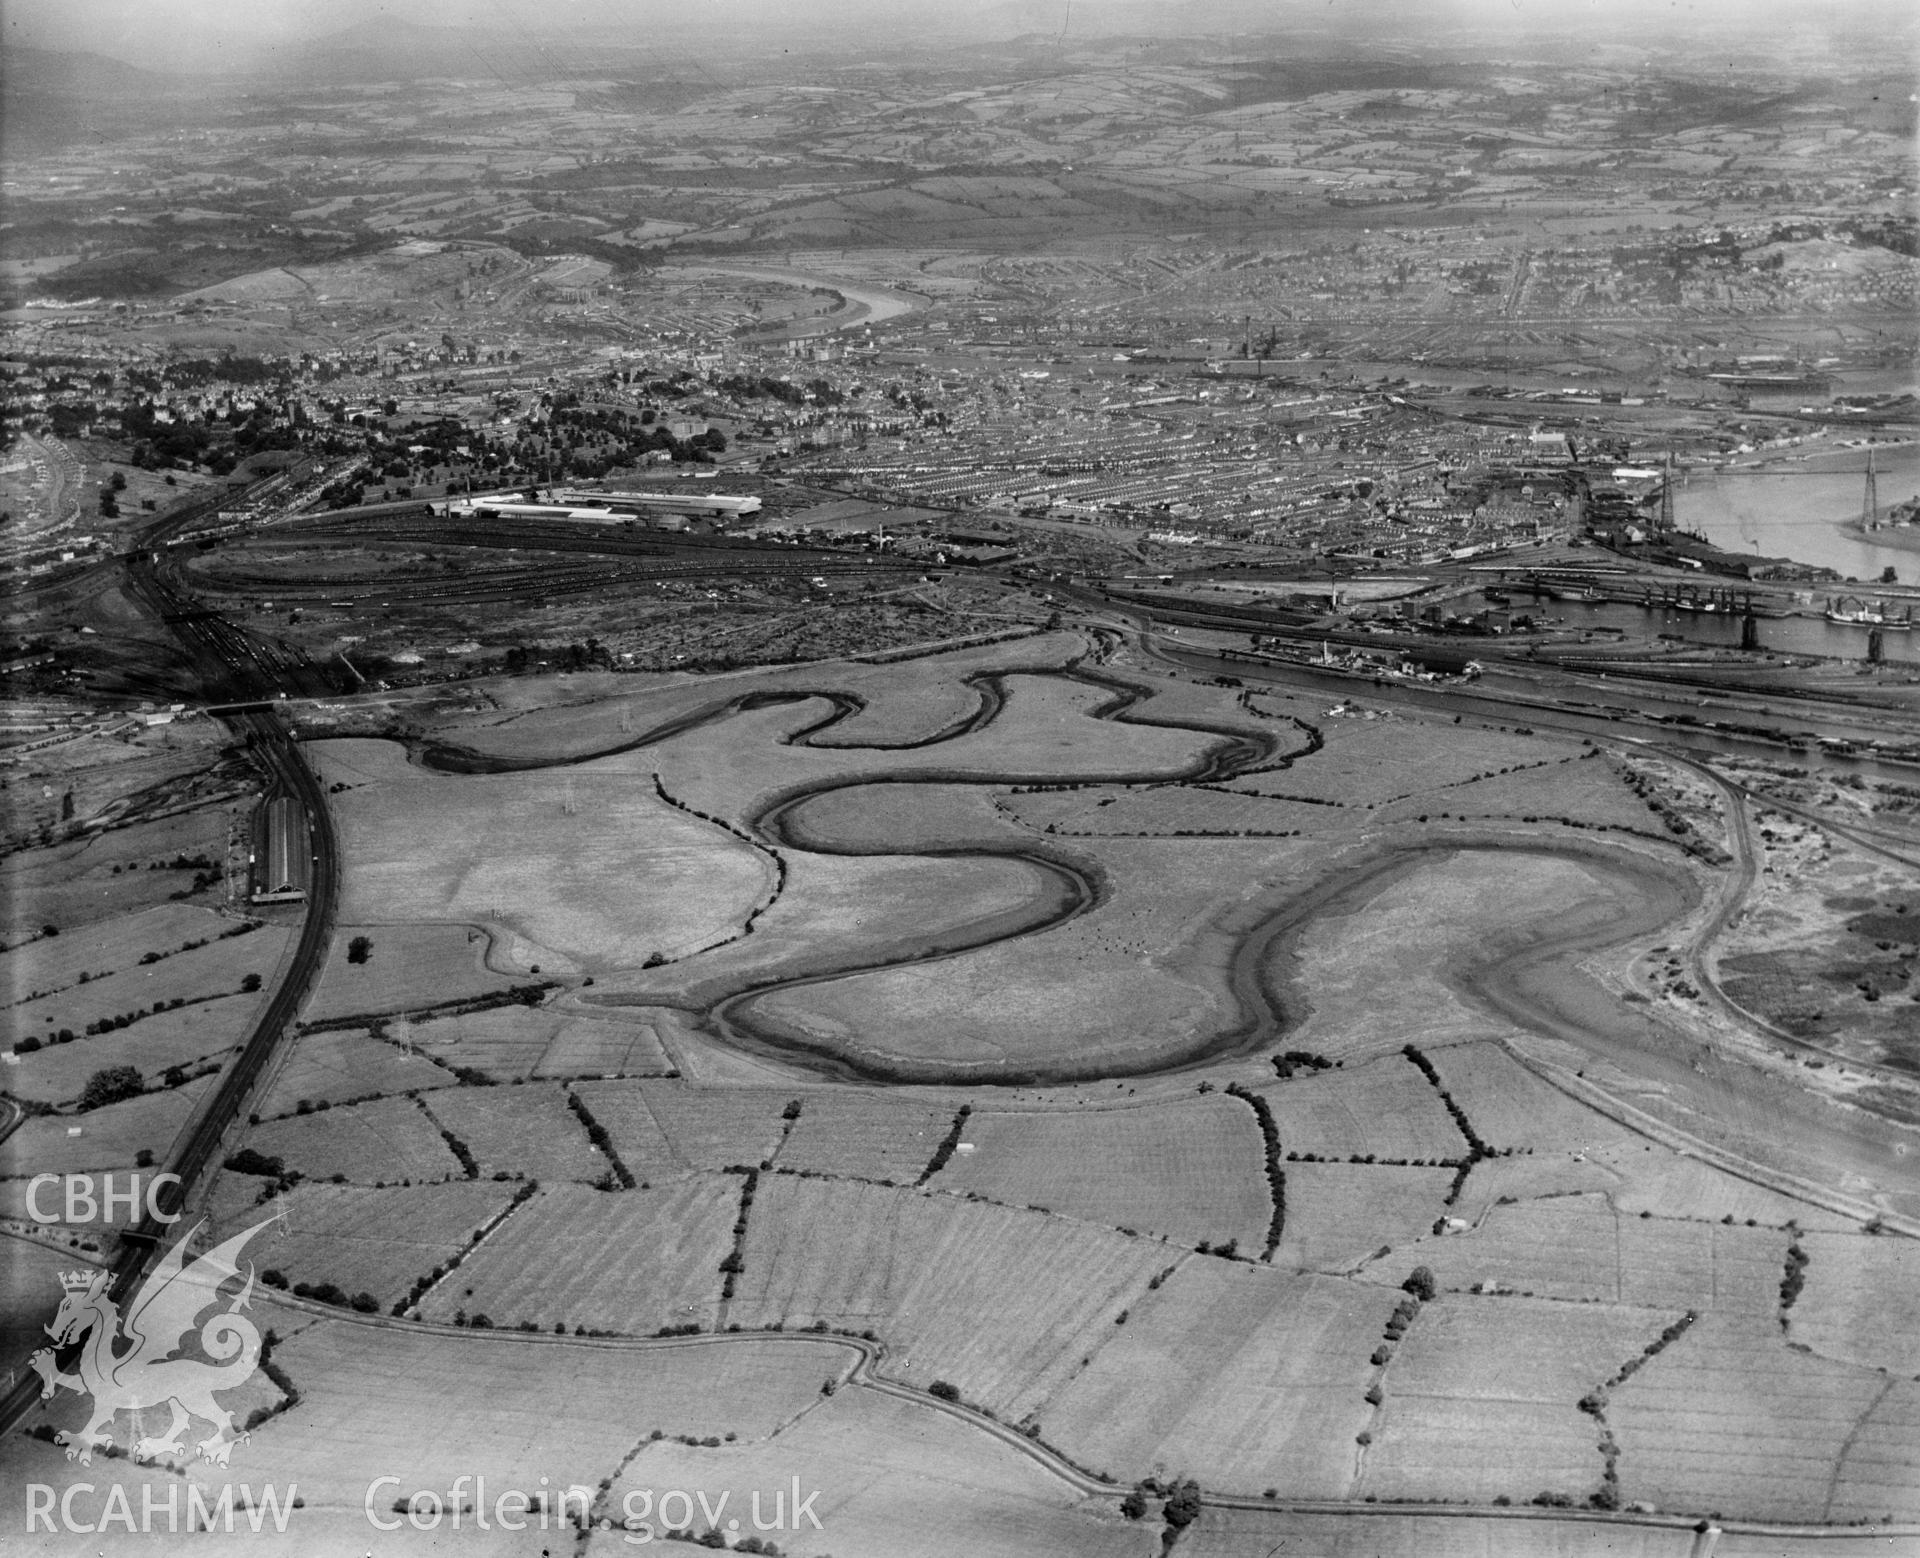 Distant view of Newport showing the Ebbw river, oblique aerial view. 5?x4? black and white glass plate negative.